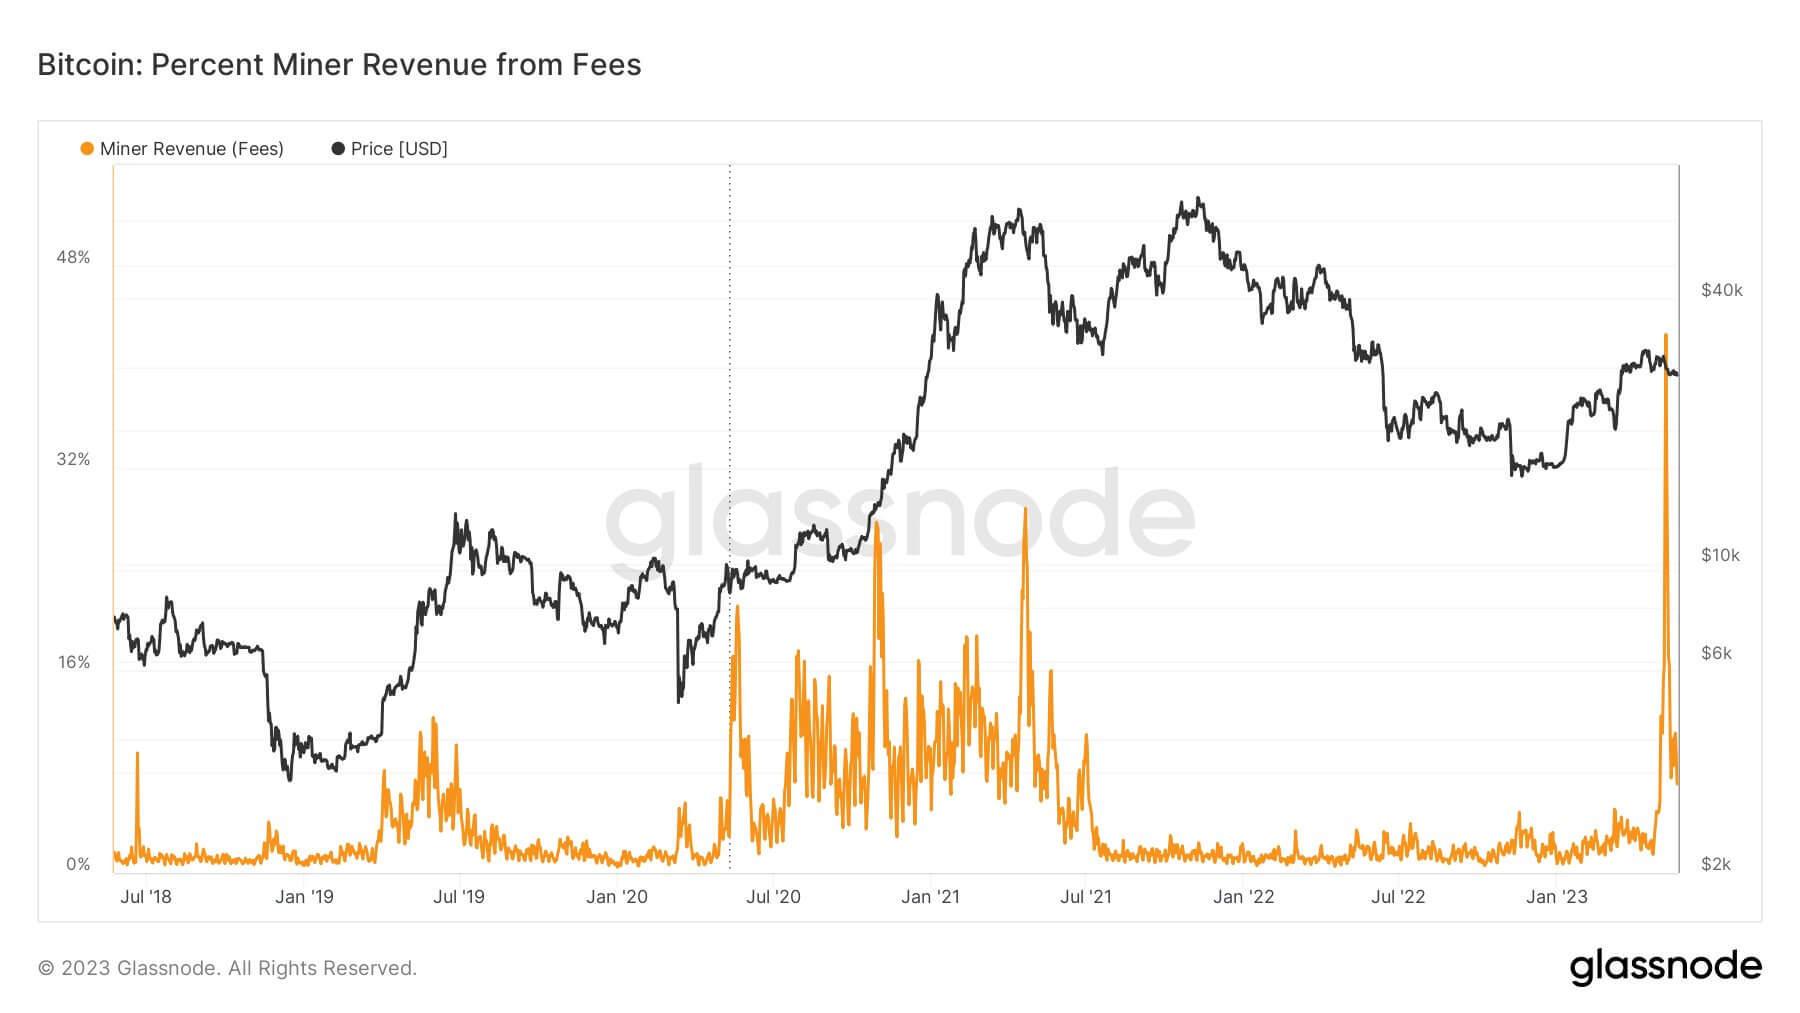 Bitcoin miner revenue derived from fees drops to 7%